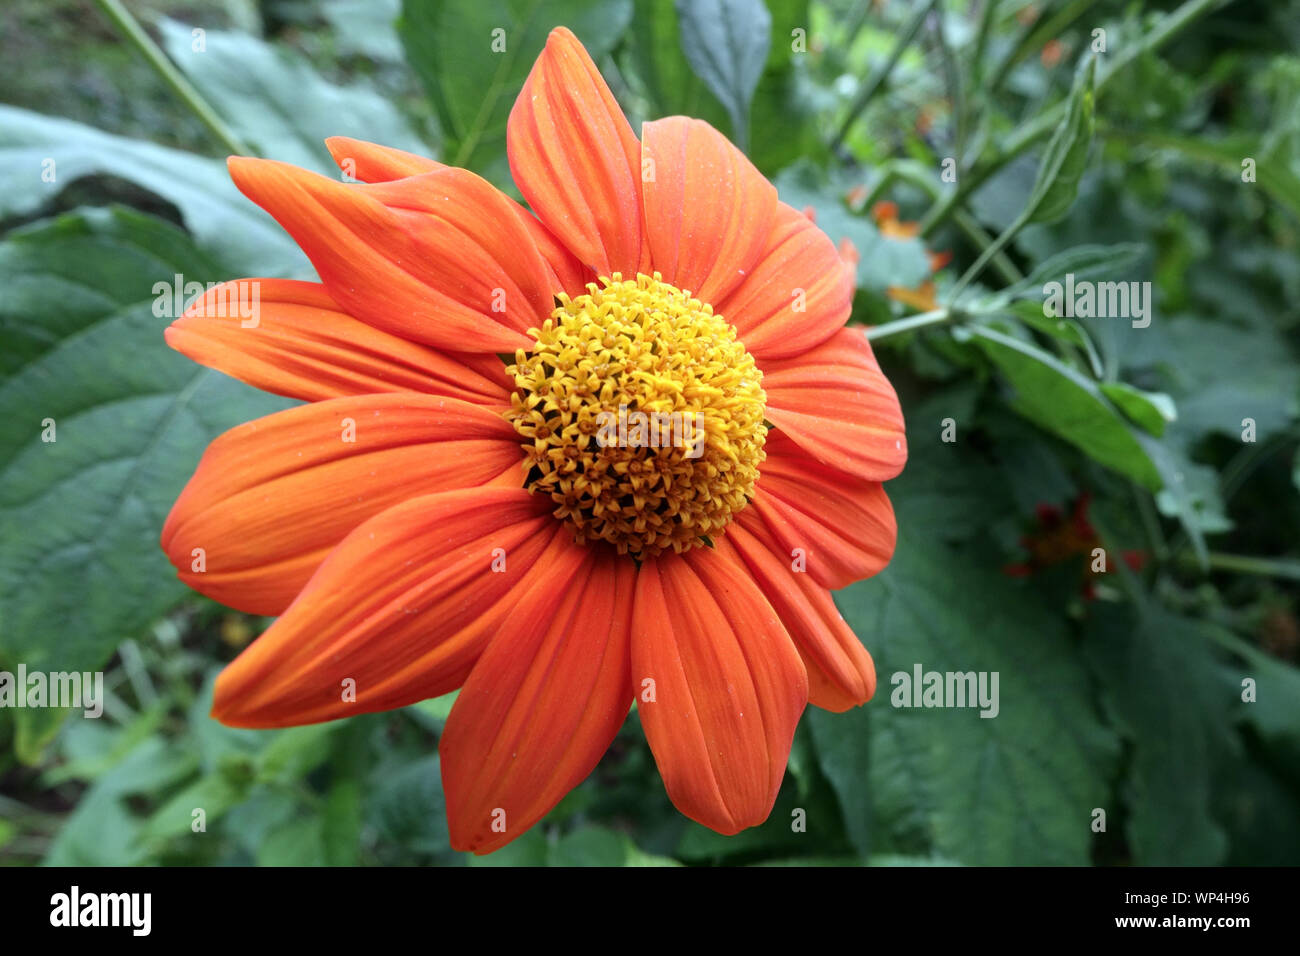 Mexican Sunflower Tithonia rotundifolia Close up Flower Tithonia Flower Closeup Orange Bloom Flowering August Plant In garden Ornamental Flower Stock Photo